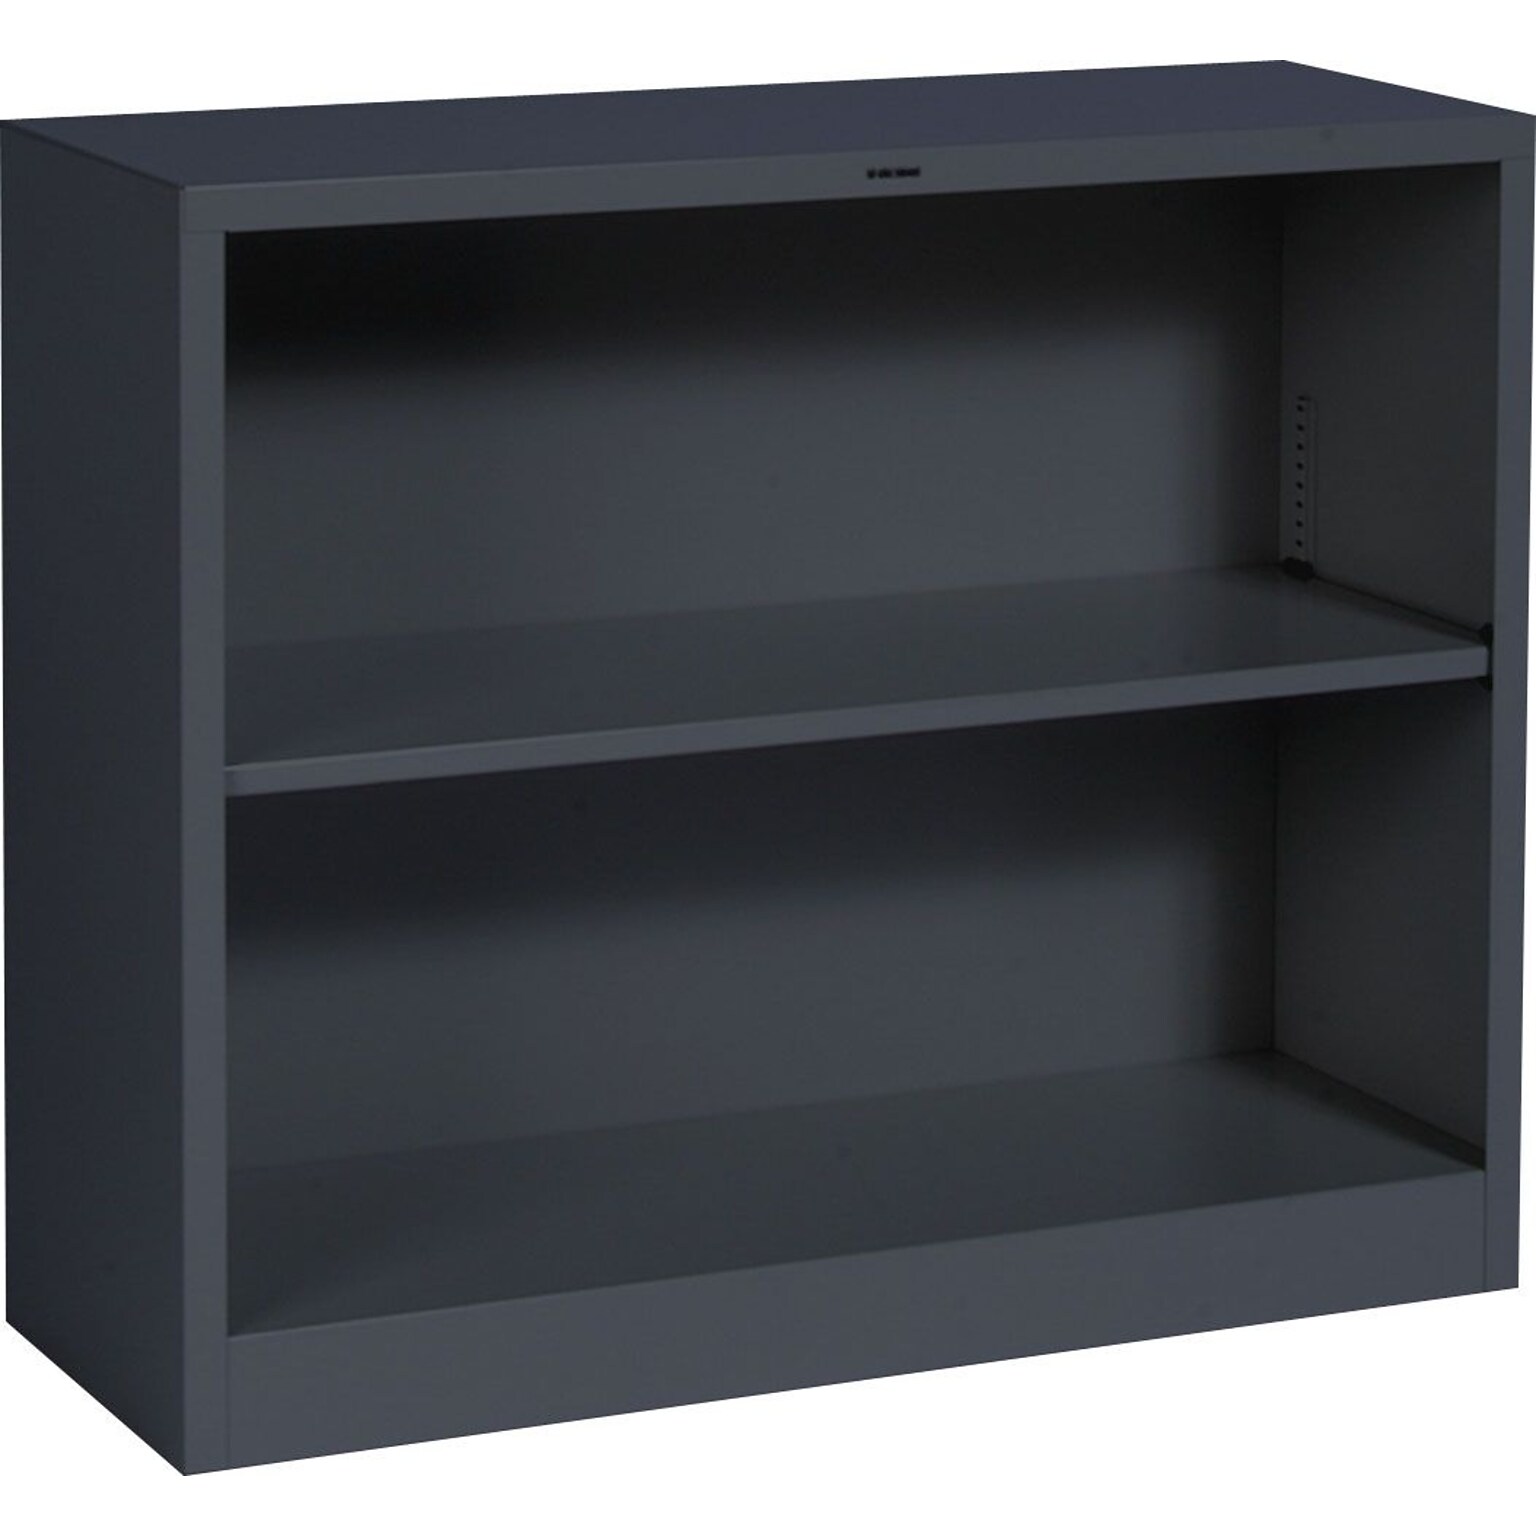 HON Brigade 29 2-Shelf Bookcase with Adjustable Shelves, Charcoal, Steel (S30ABCS)